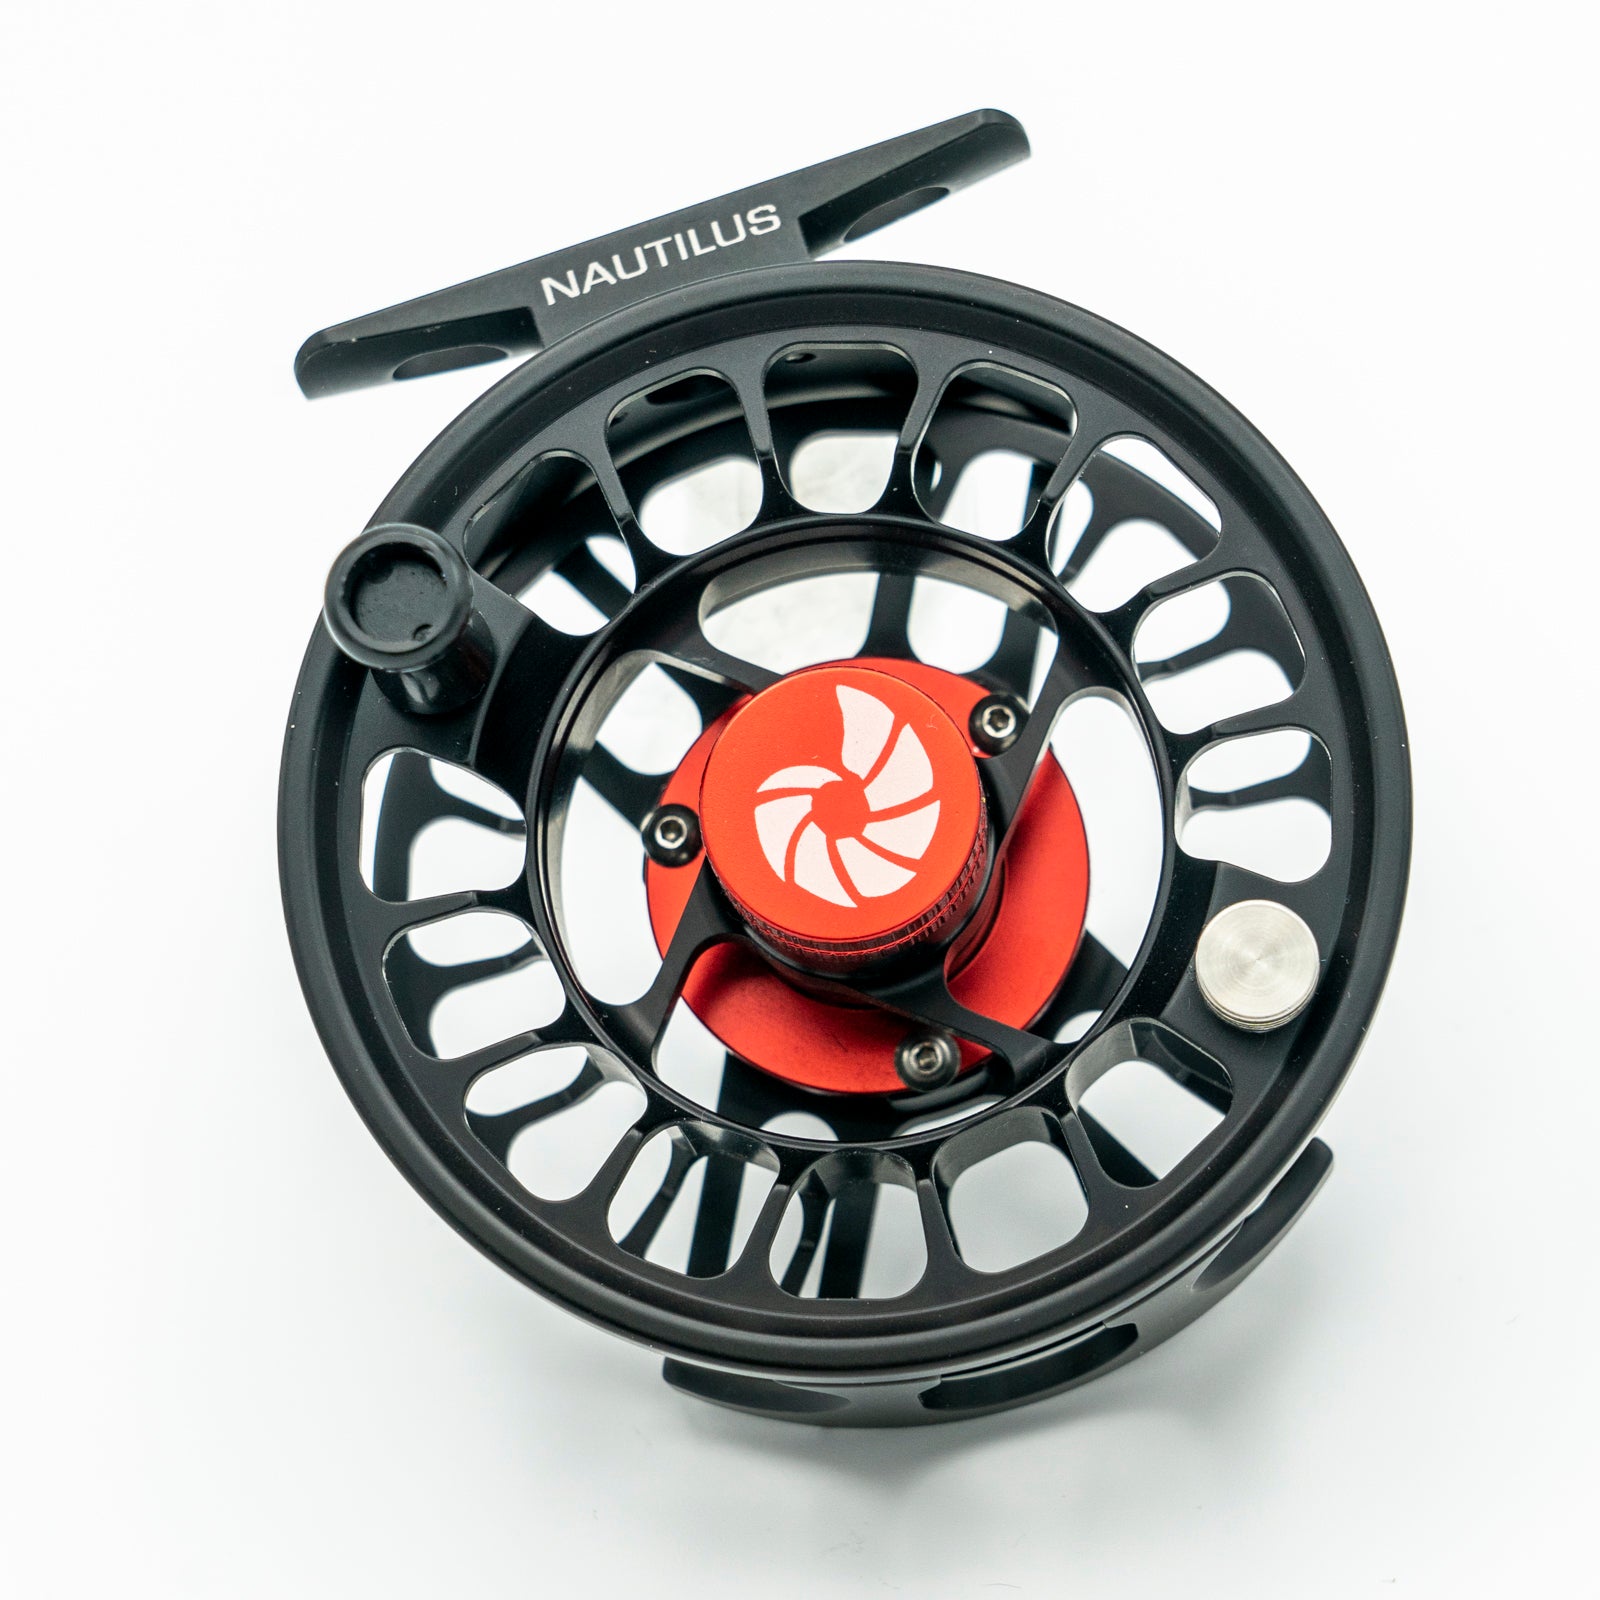 Nautilus X-Series Fly Fishing Reel Product Details